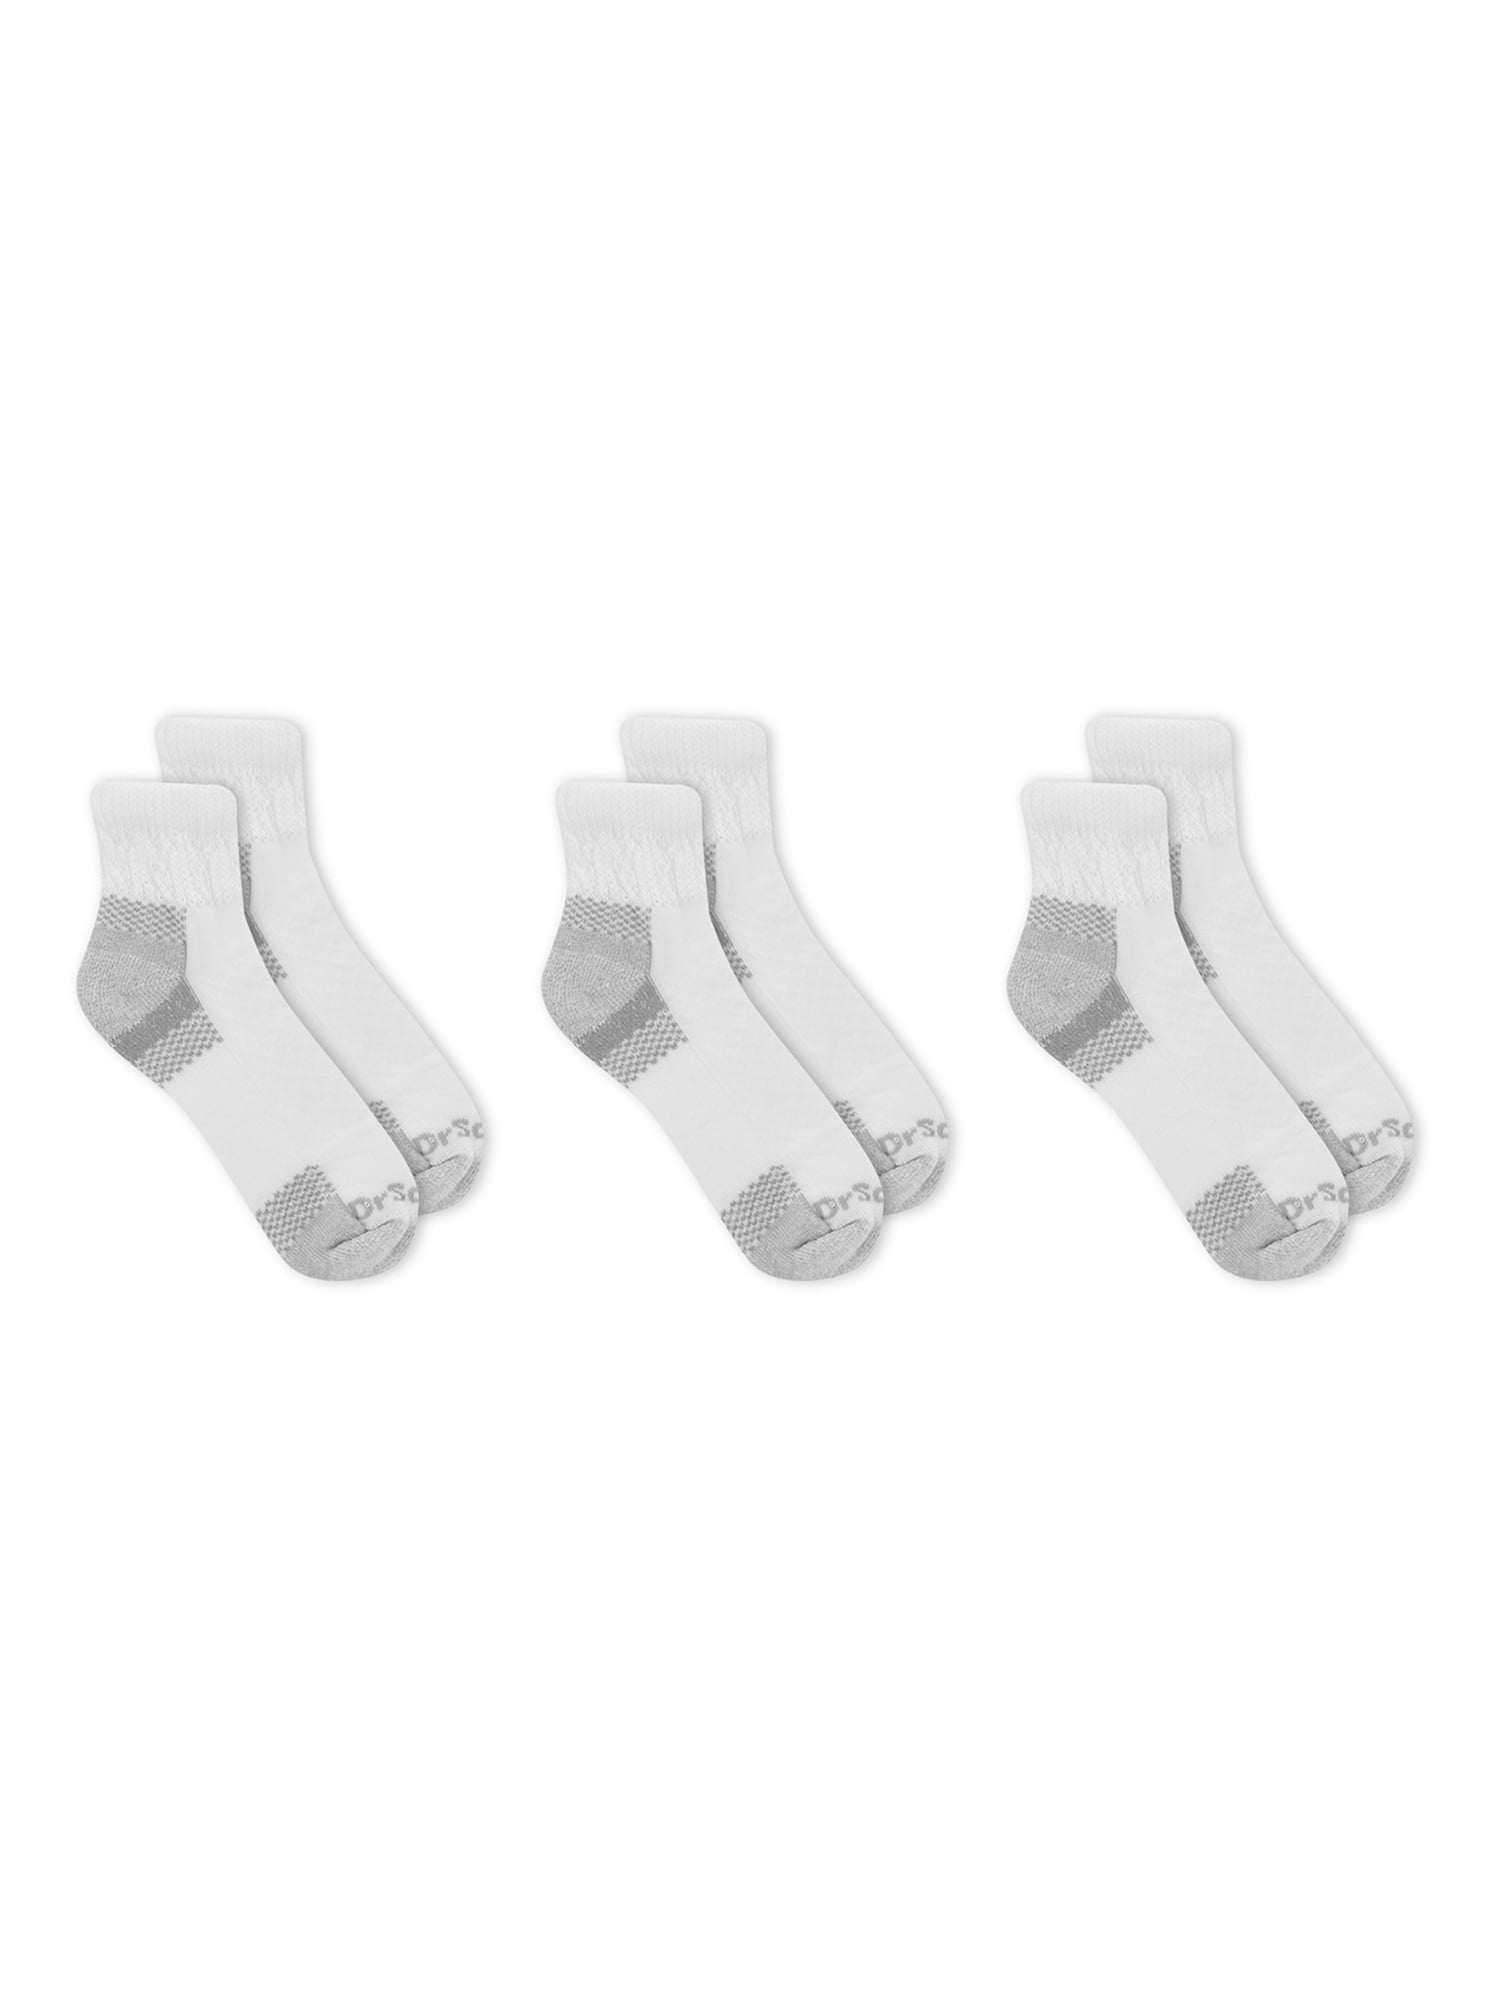 Dr. Scholl's Women's Advanced Relief Blister Guard Ankle Socks, 3 Pack ...